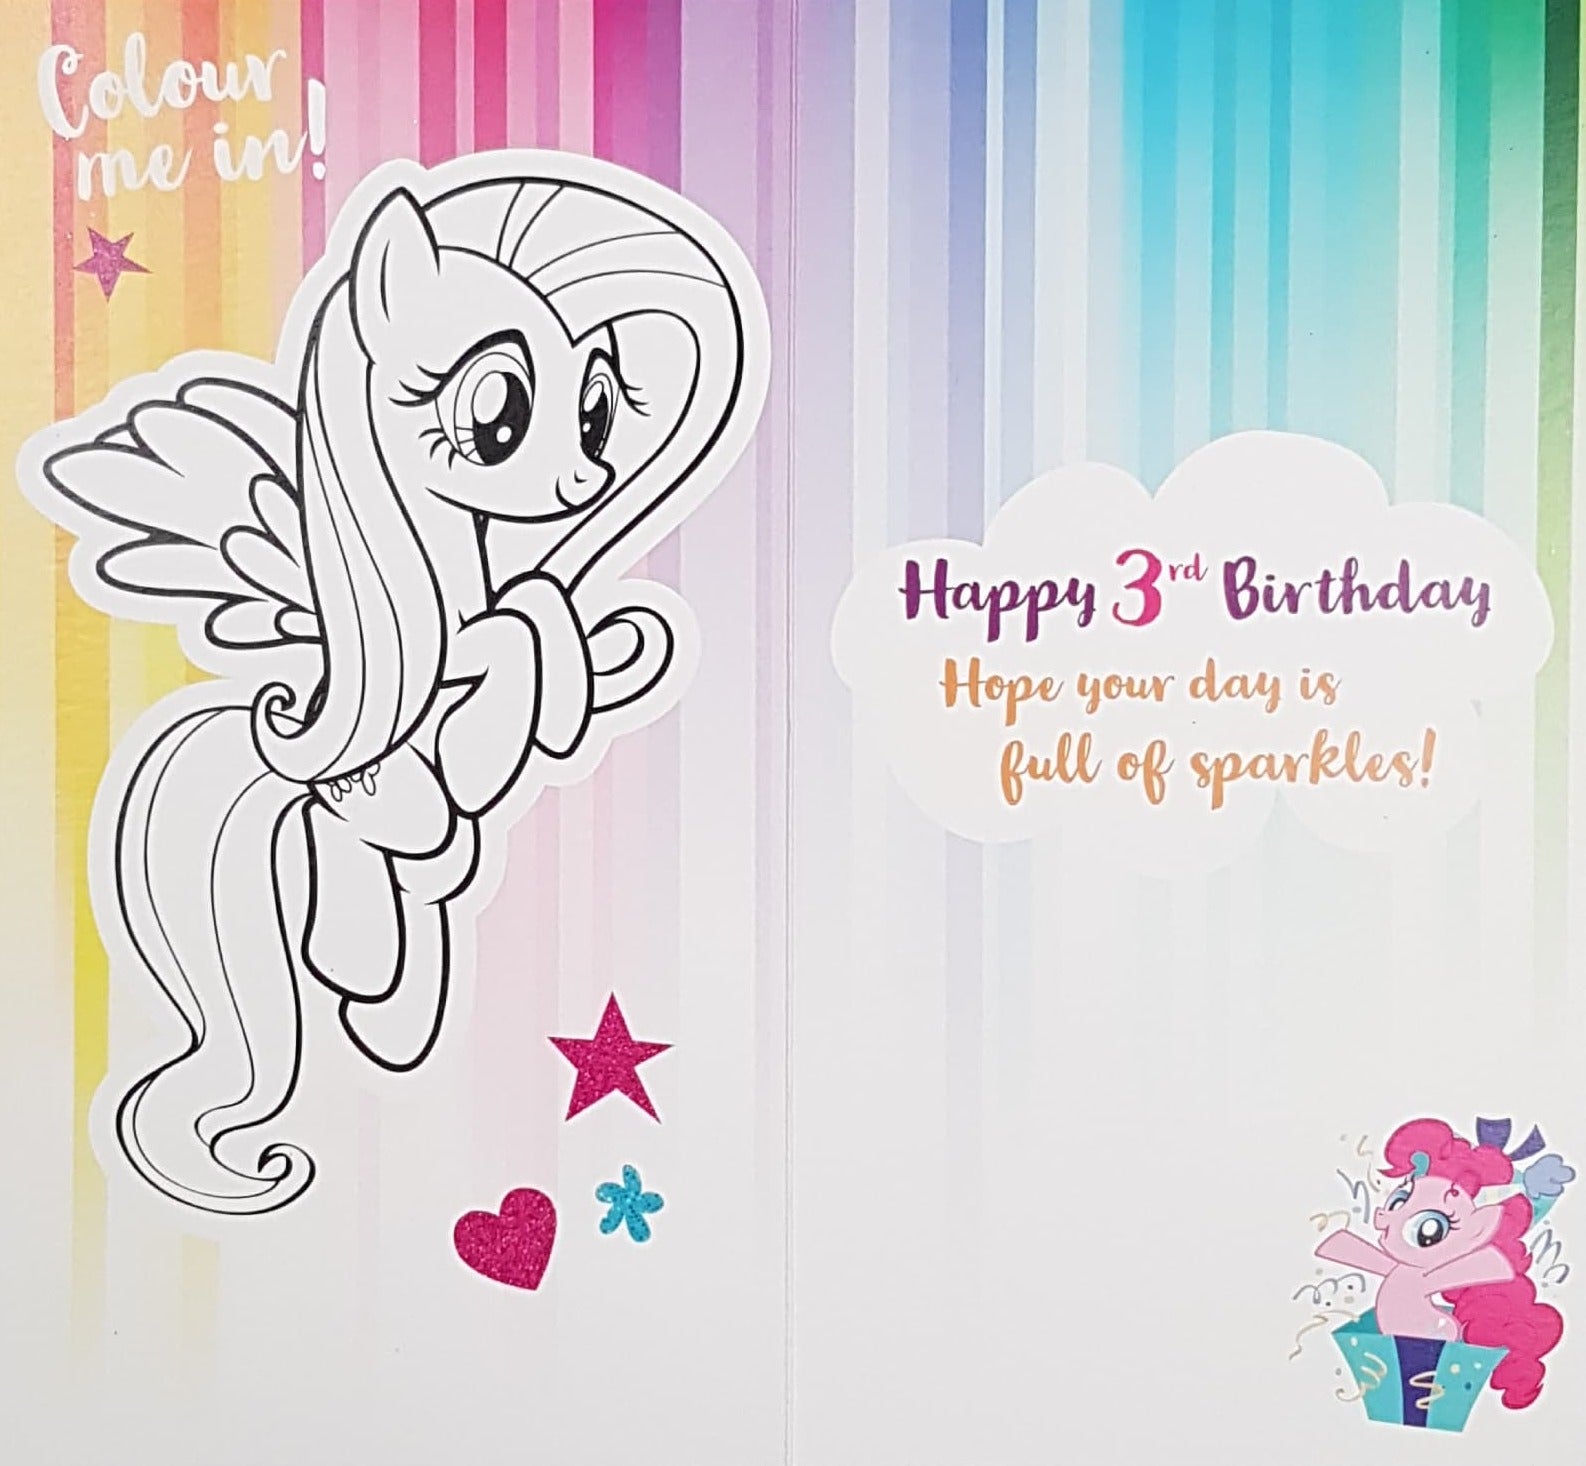 Age 3 Birthday Card - A Cute Pony With Pink Hair & Two Glittery Stars